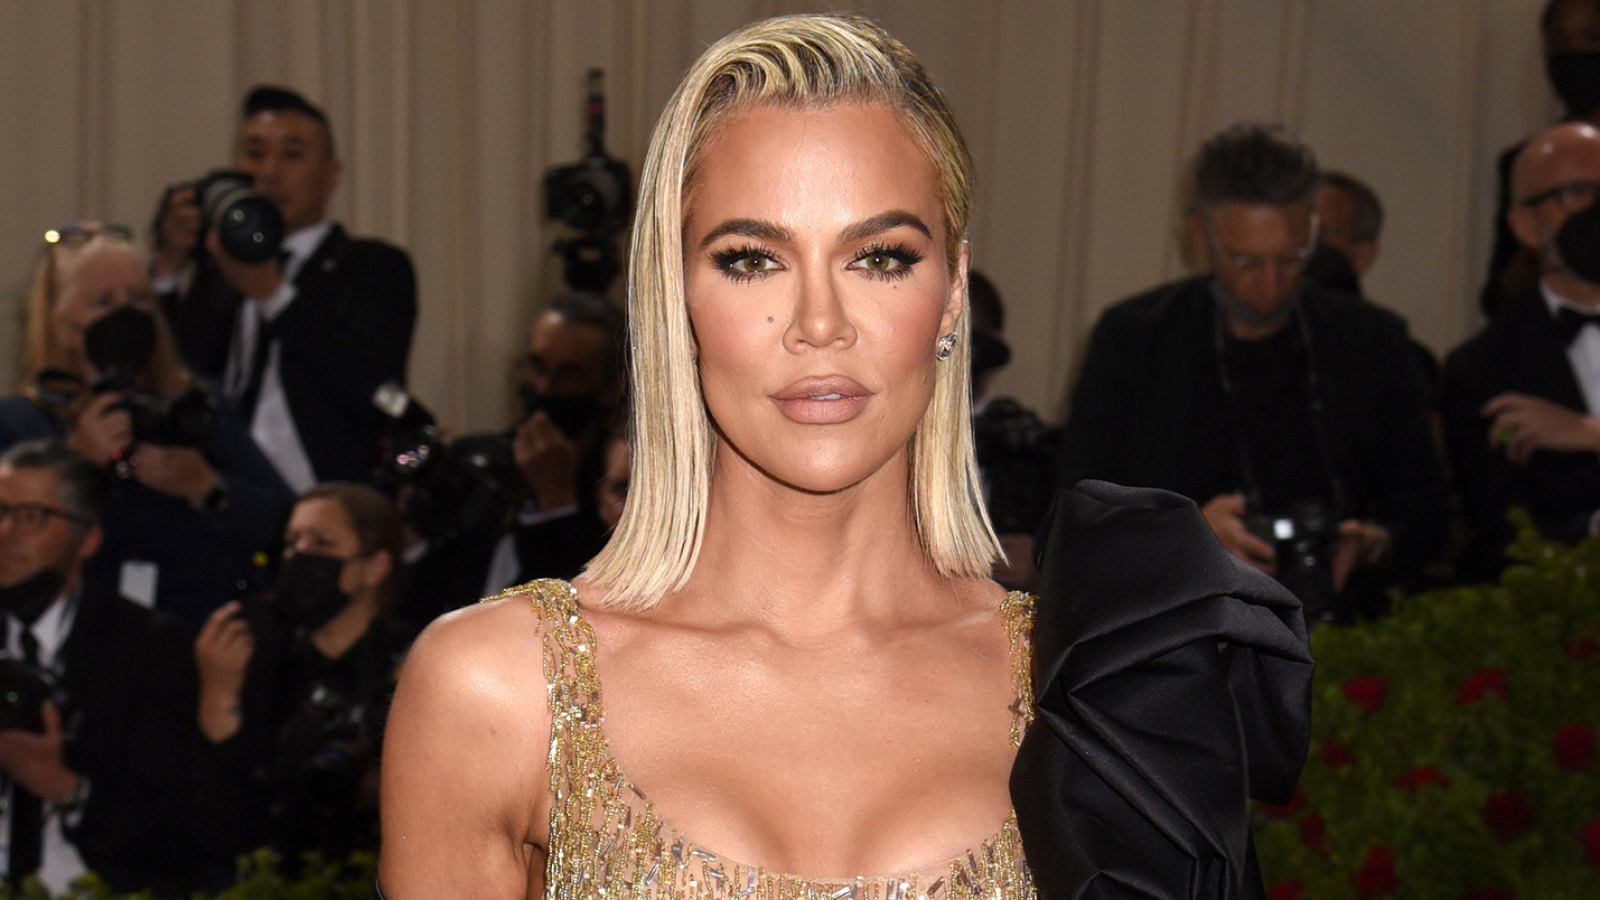 Khloe Kardashian 'Can't Wait' to Be in Her 40s After Turning 39